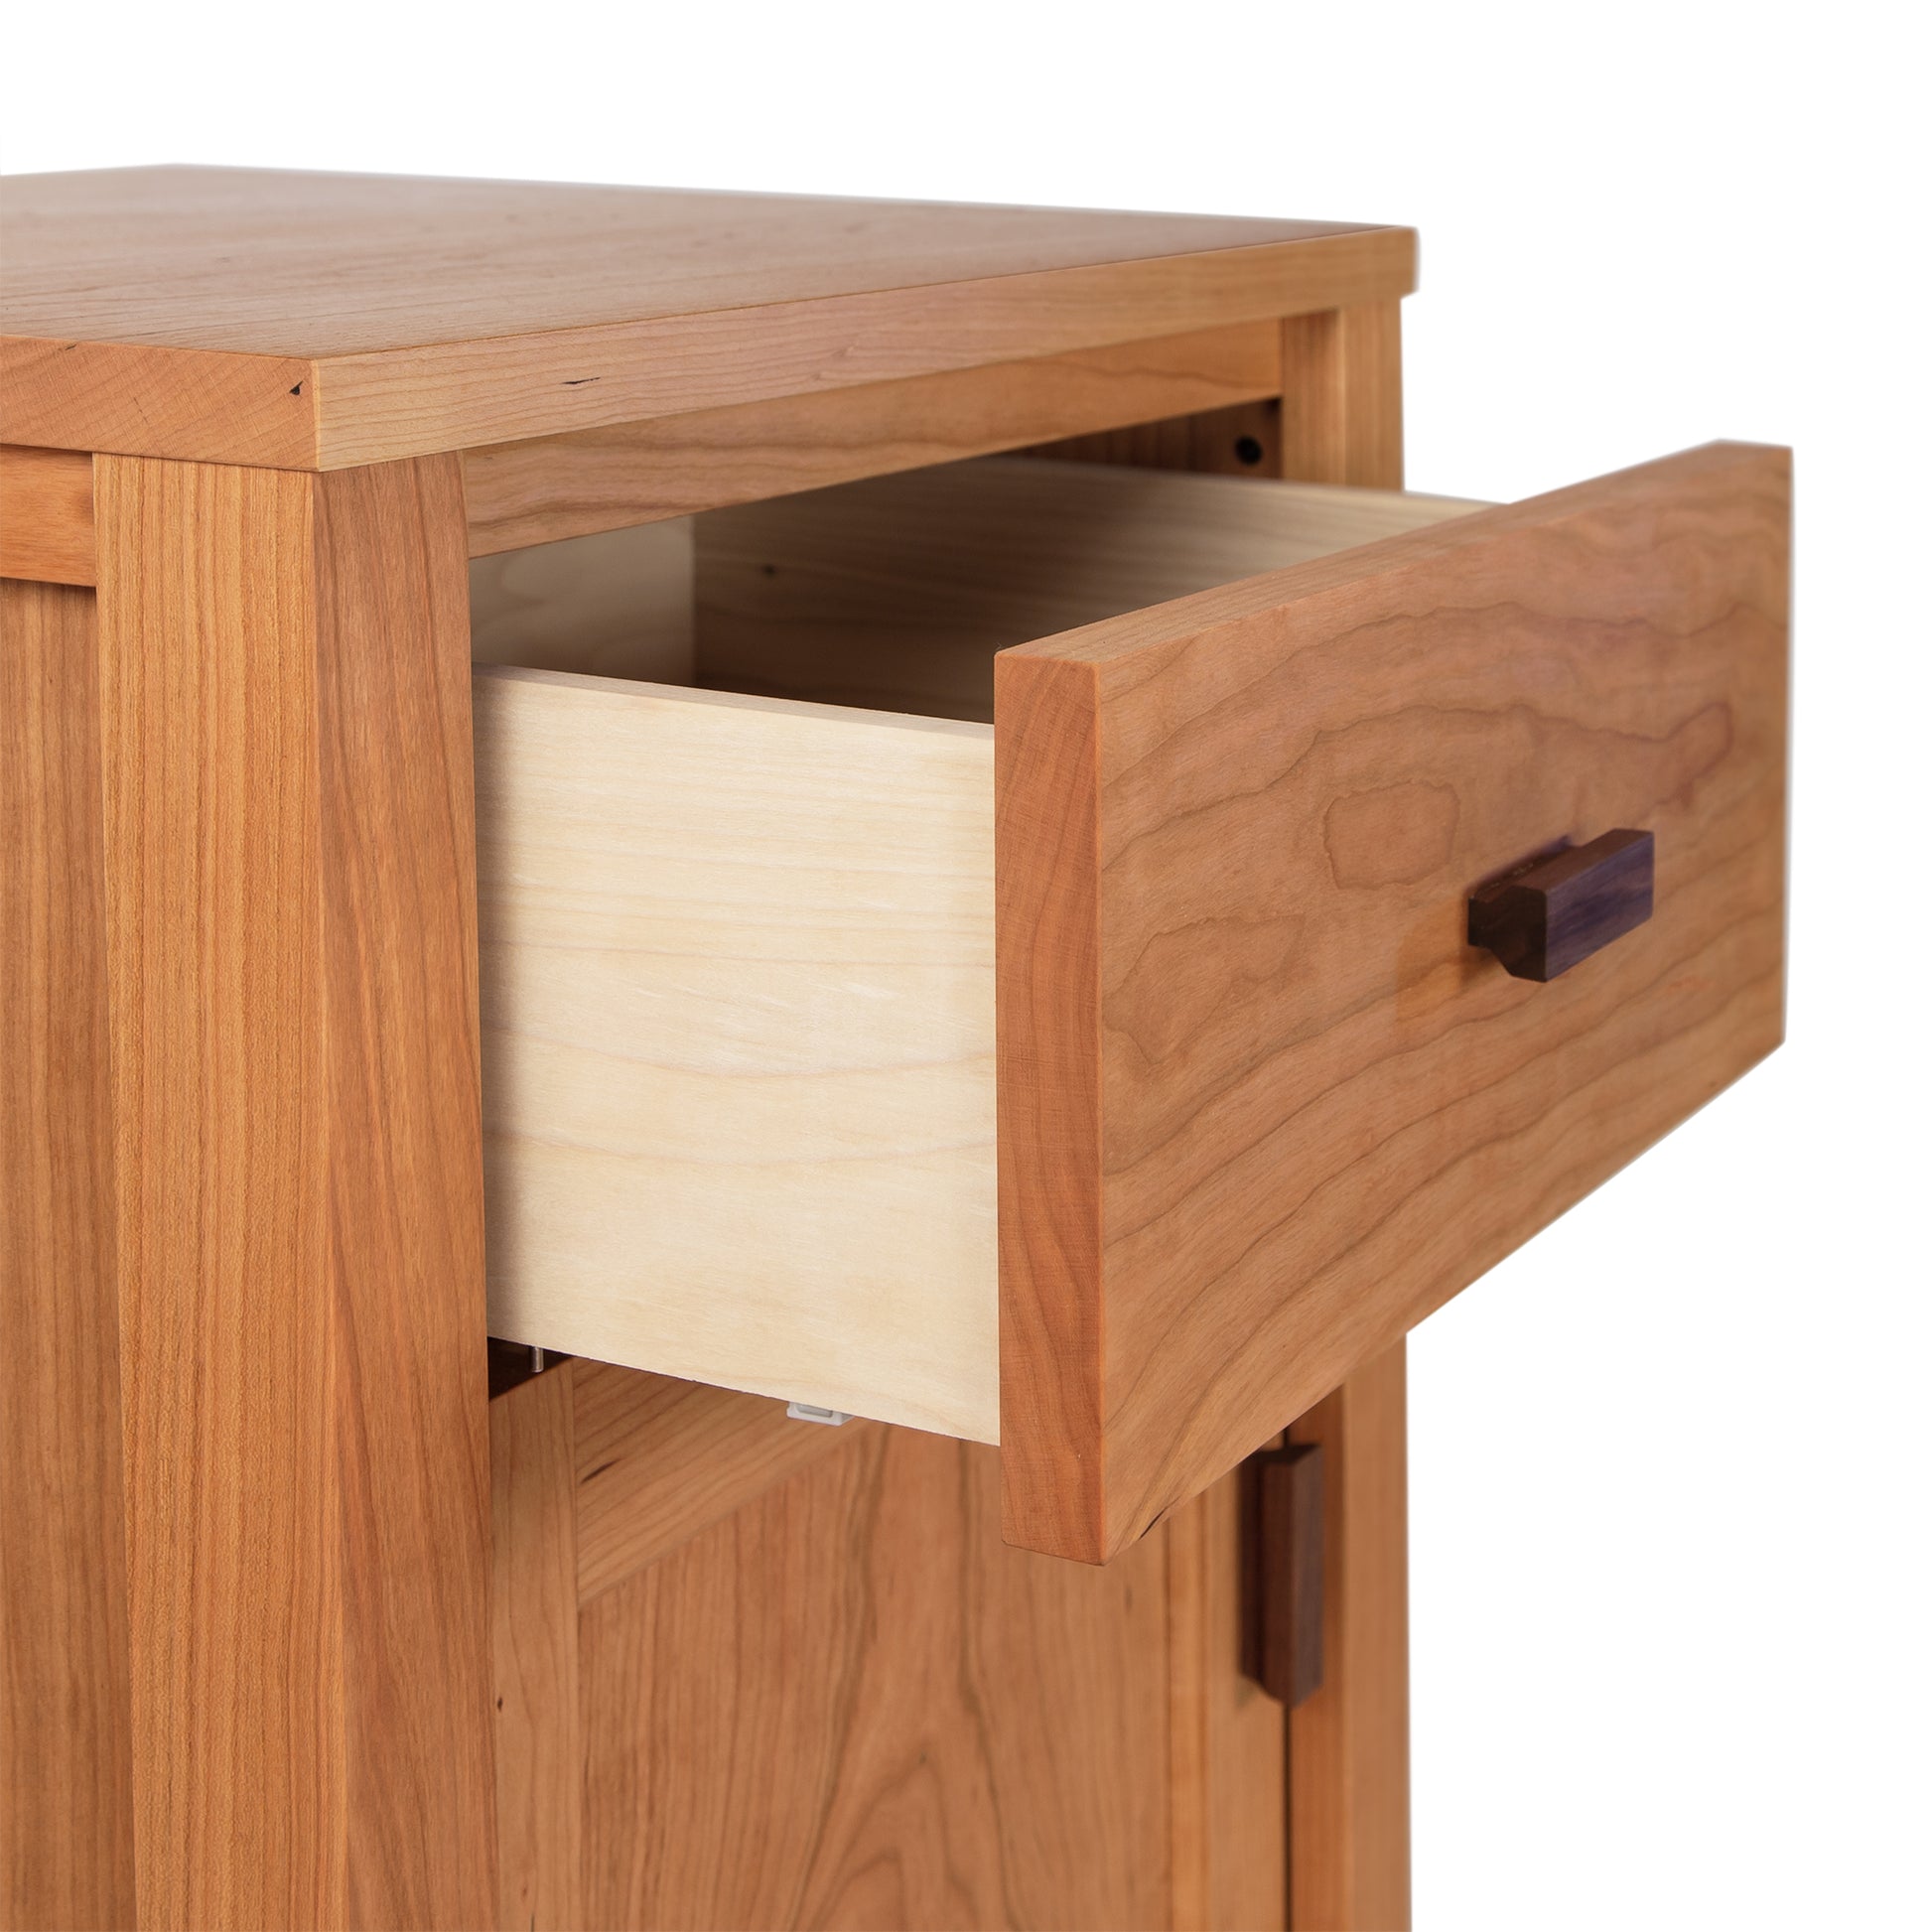 A close-up of a partially open drawer in a Maple Corner Woodworks Andover Modern 1-Drawer Nightstand with Door, showing the grain and detail of the sustainable hardwoods on both the drawer and the nightstand. The drawer pull is a...